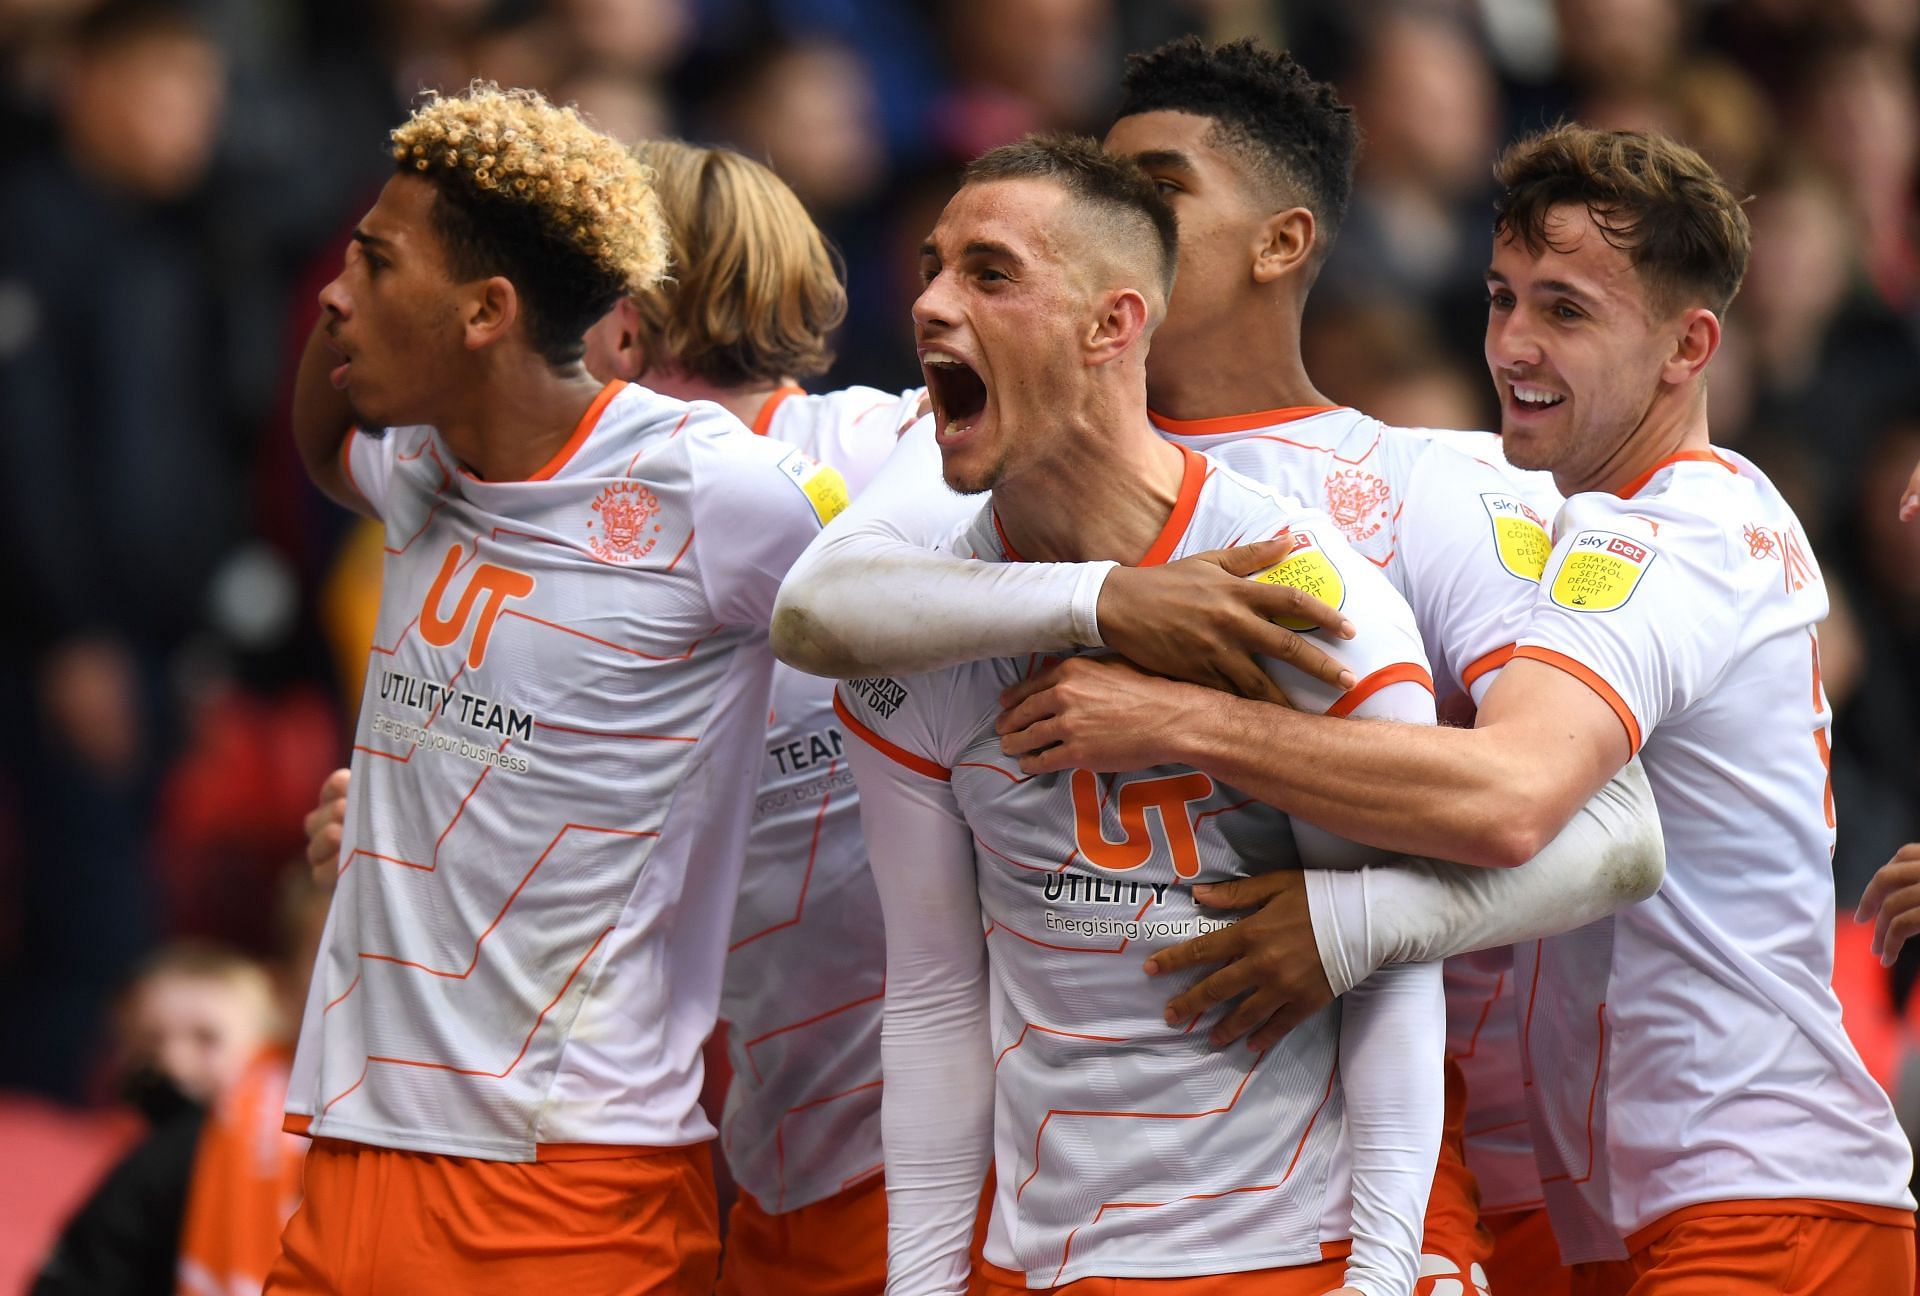 Blackpool will travel to face Reading on Wednesday